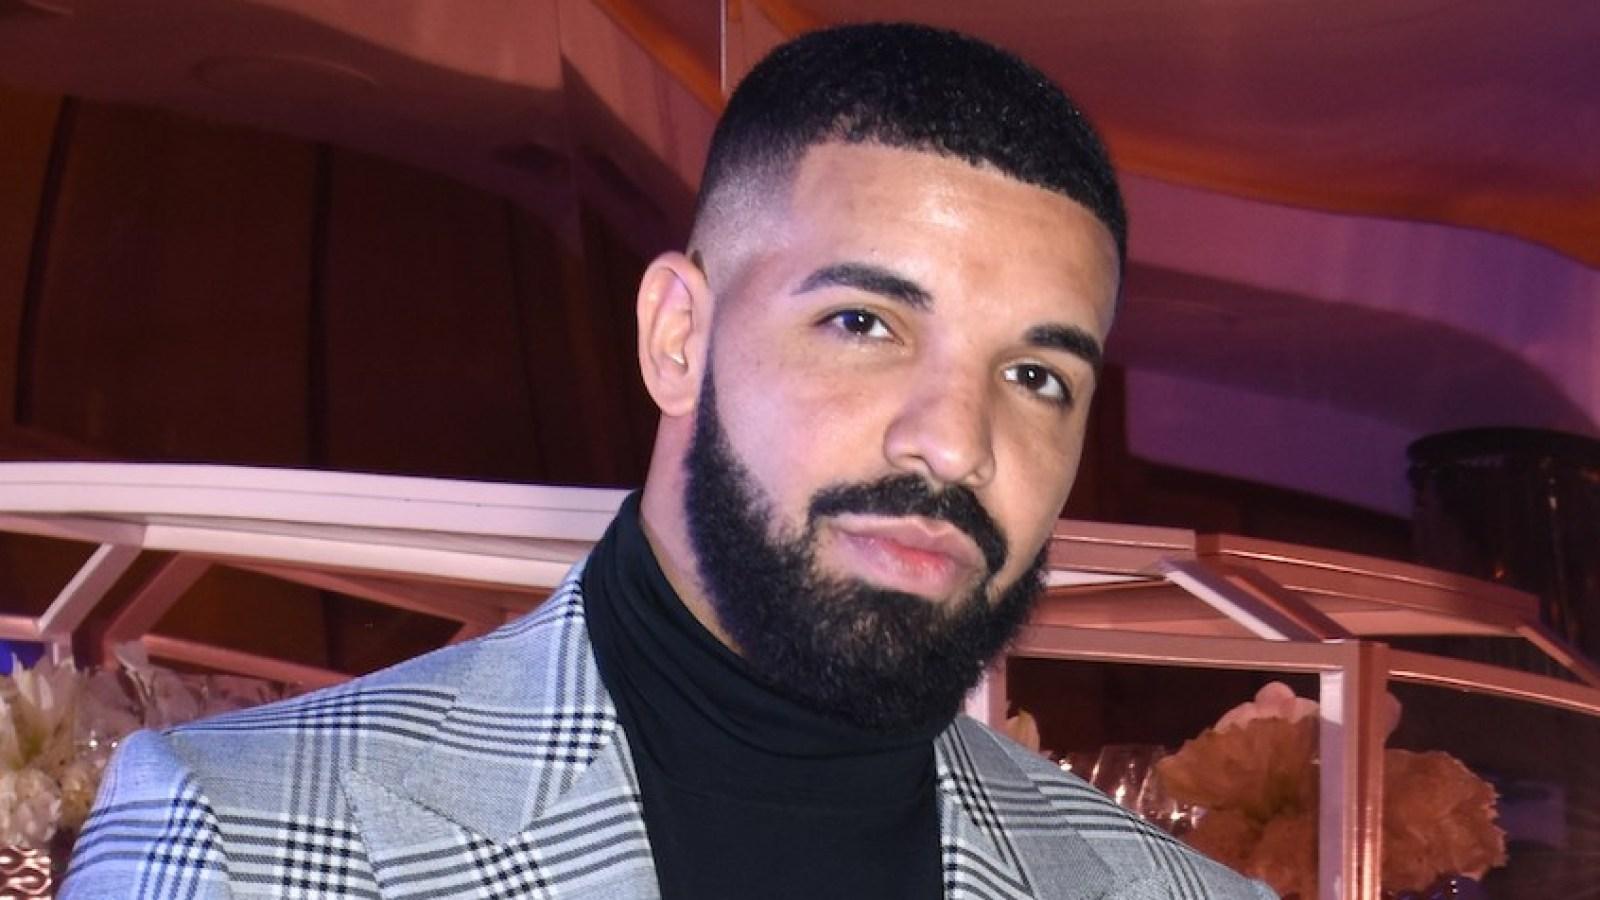 Drake Under Fire for Kissing, Touching Girl, in Resurfaced Video